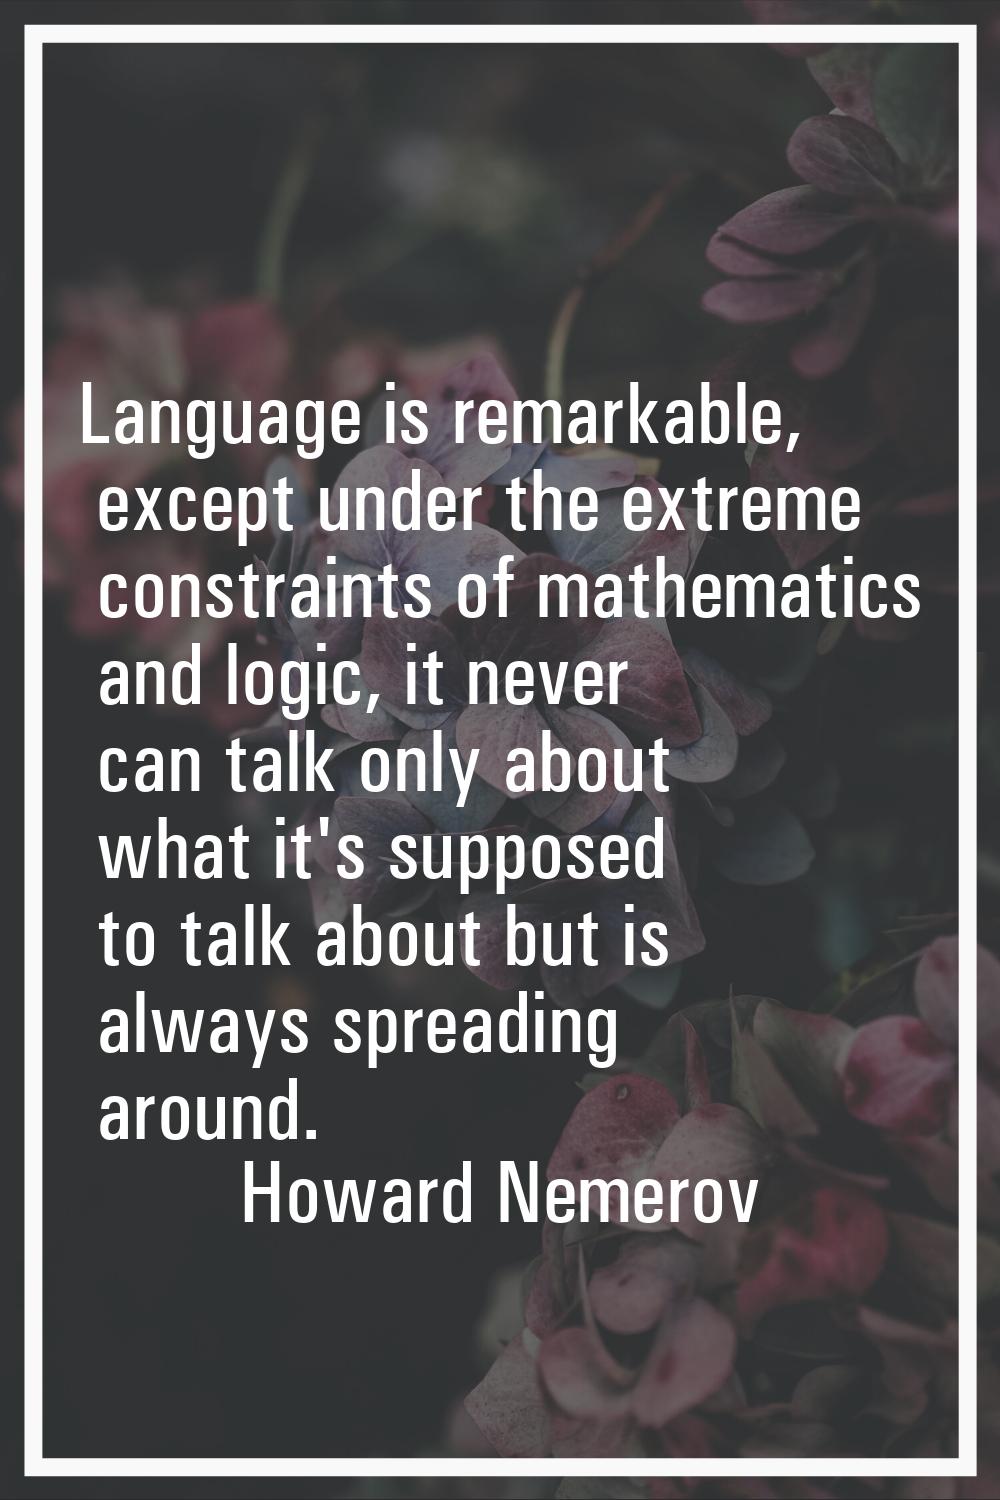 Language is remarkable, except under the extreme constraints of mathematics and logic, it never can